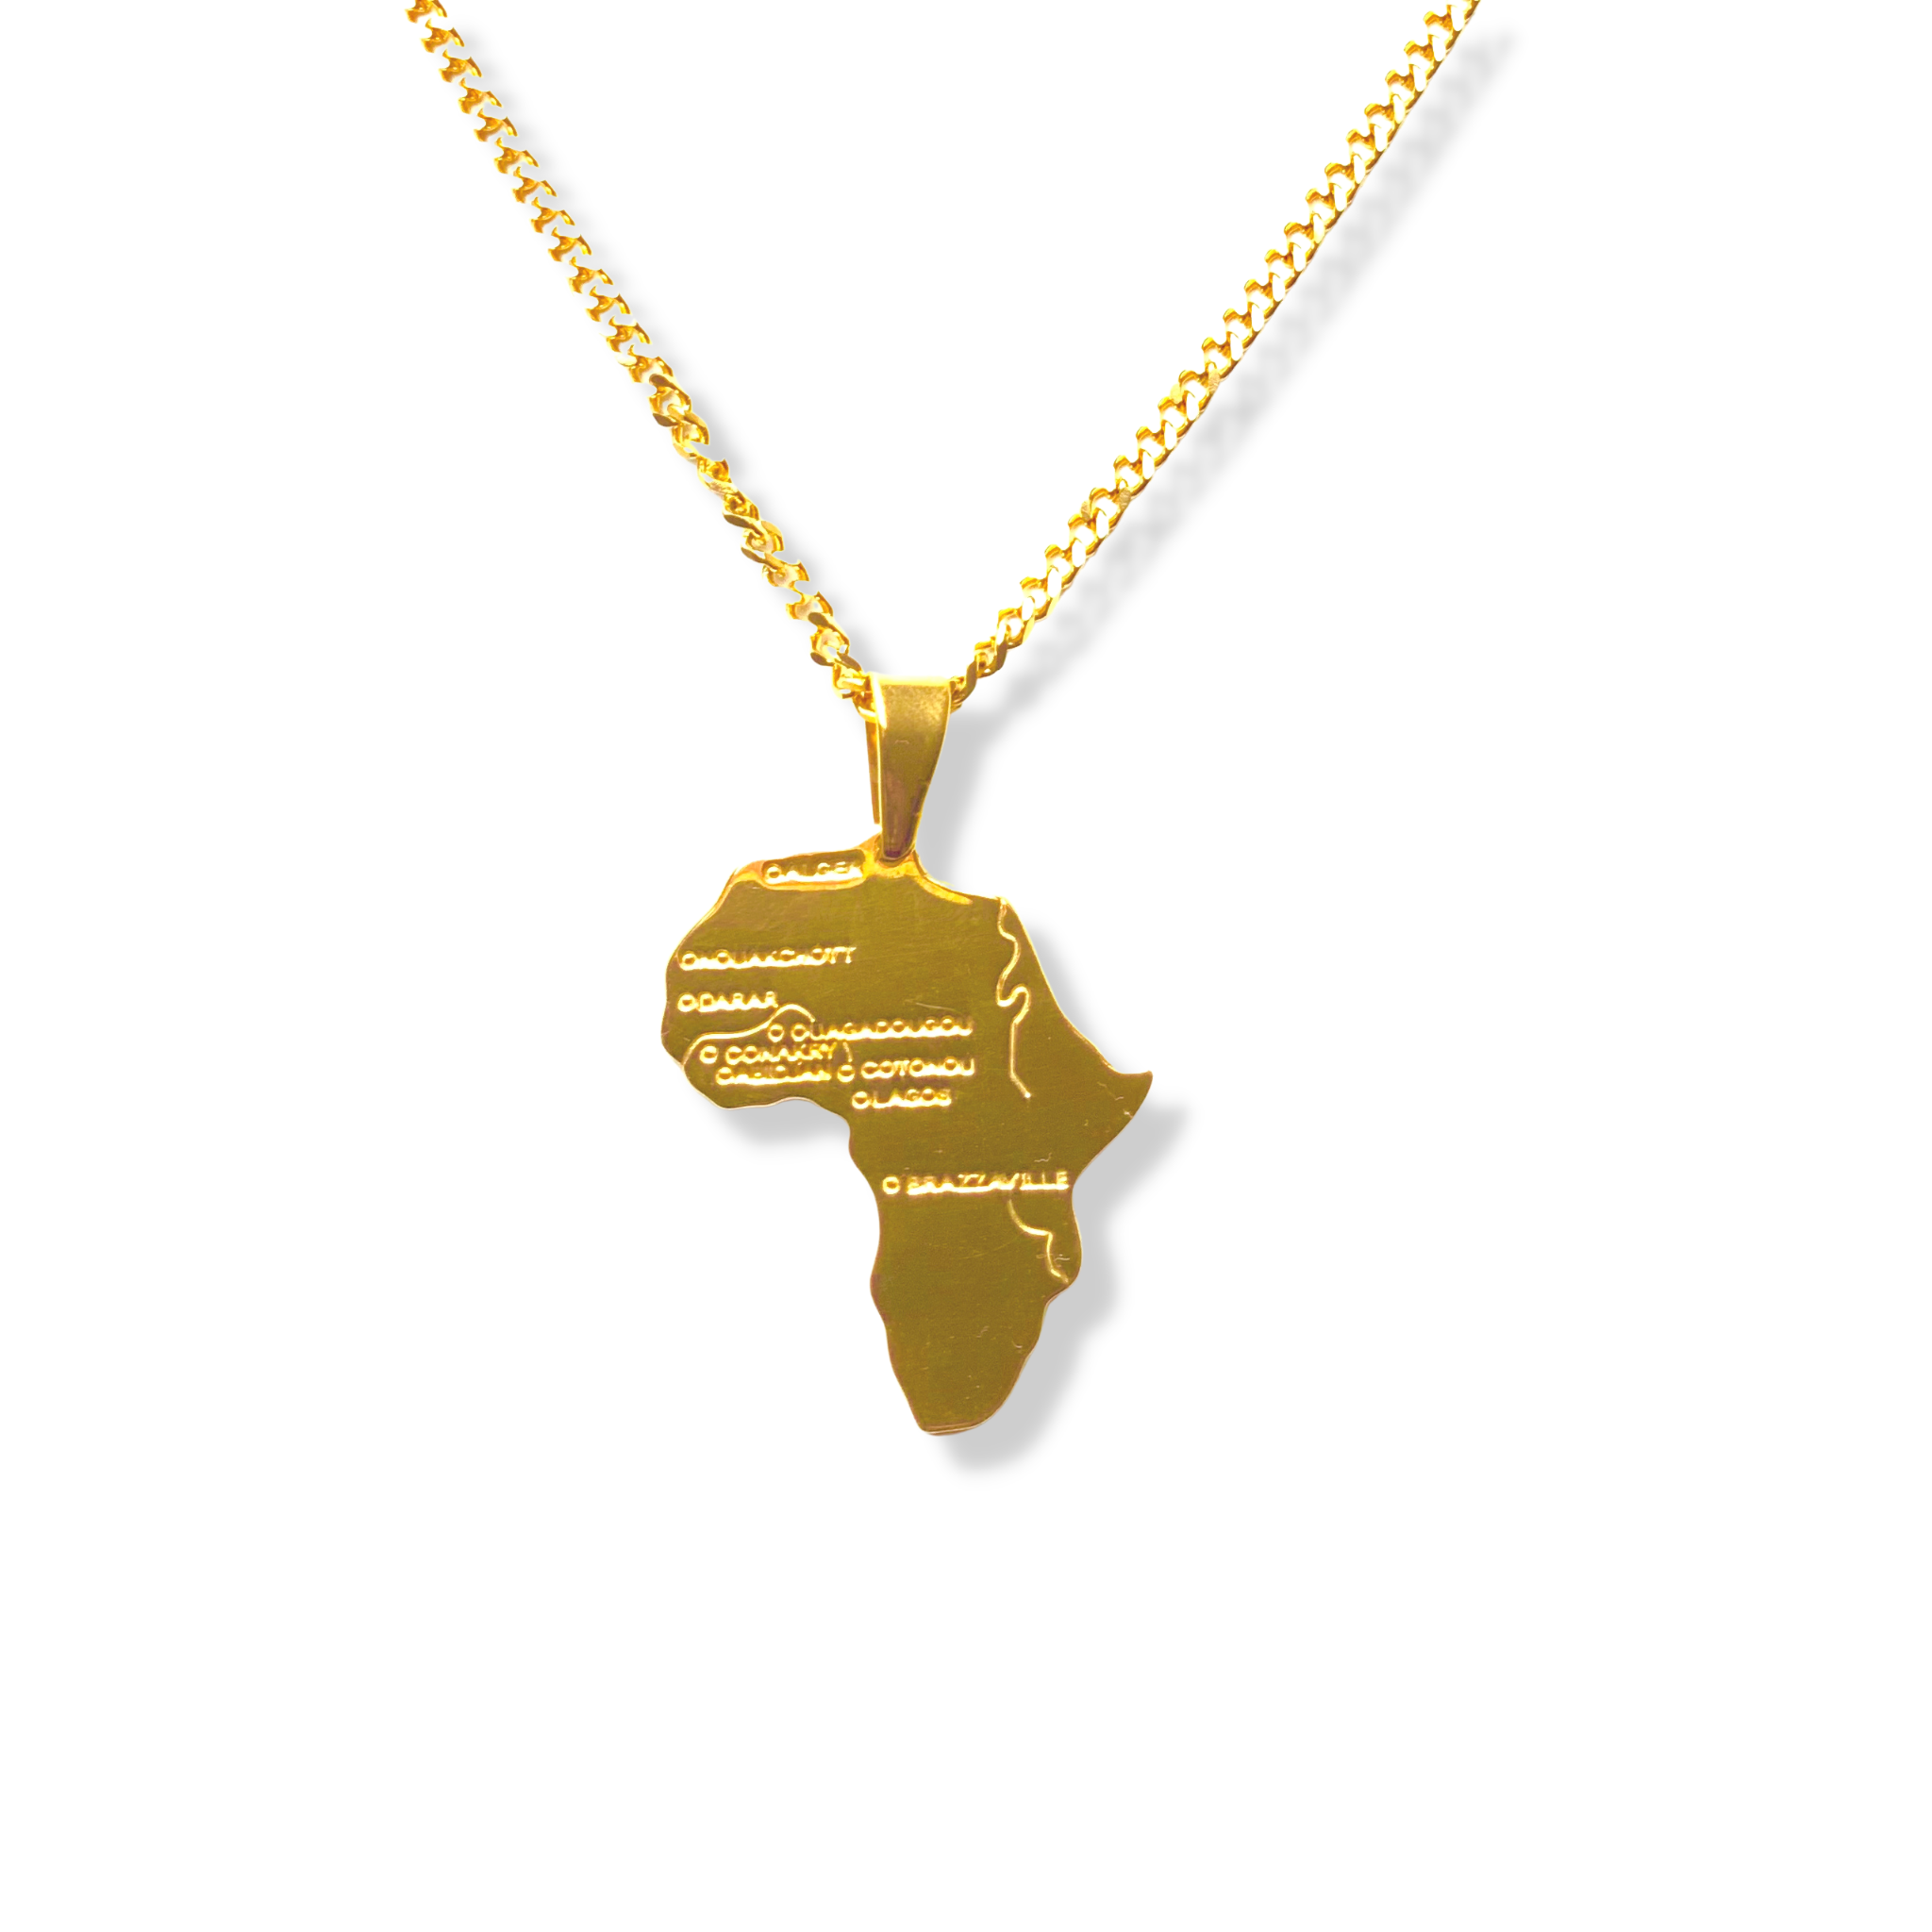 From Africa Necklace